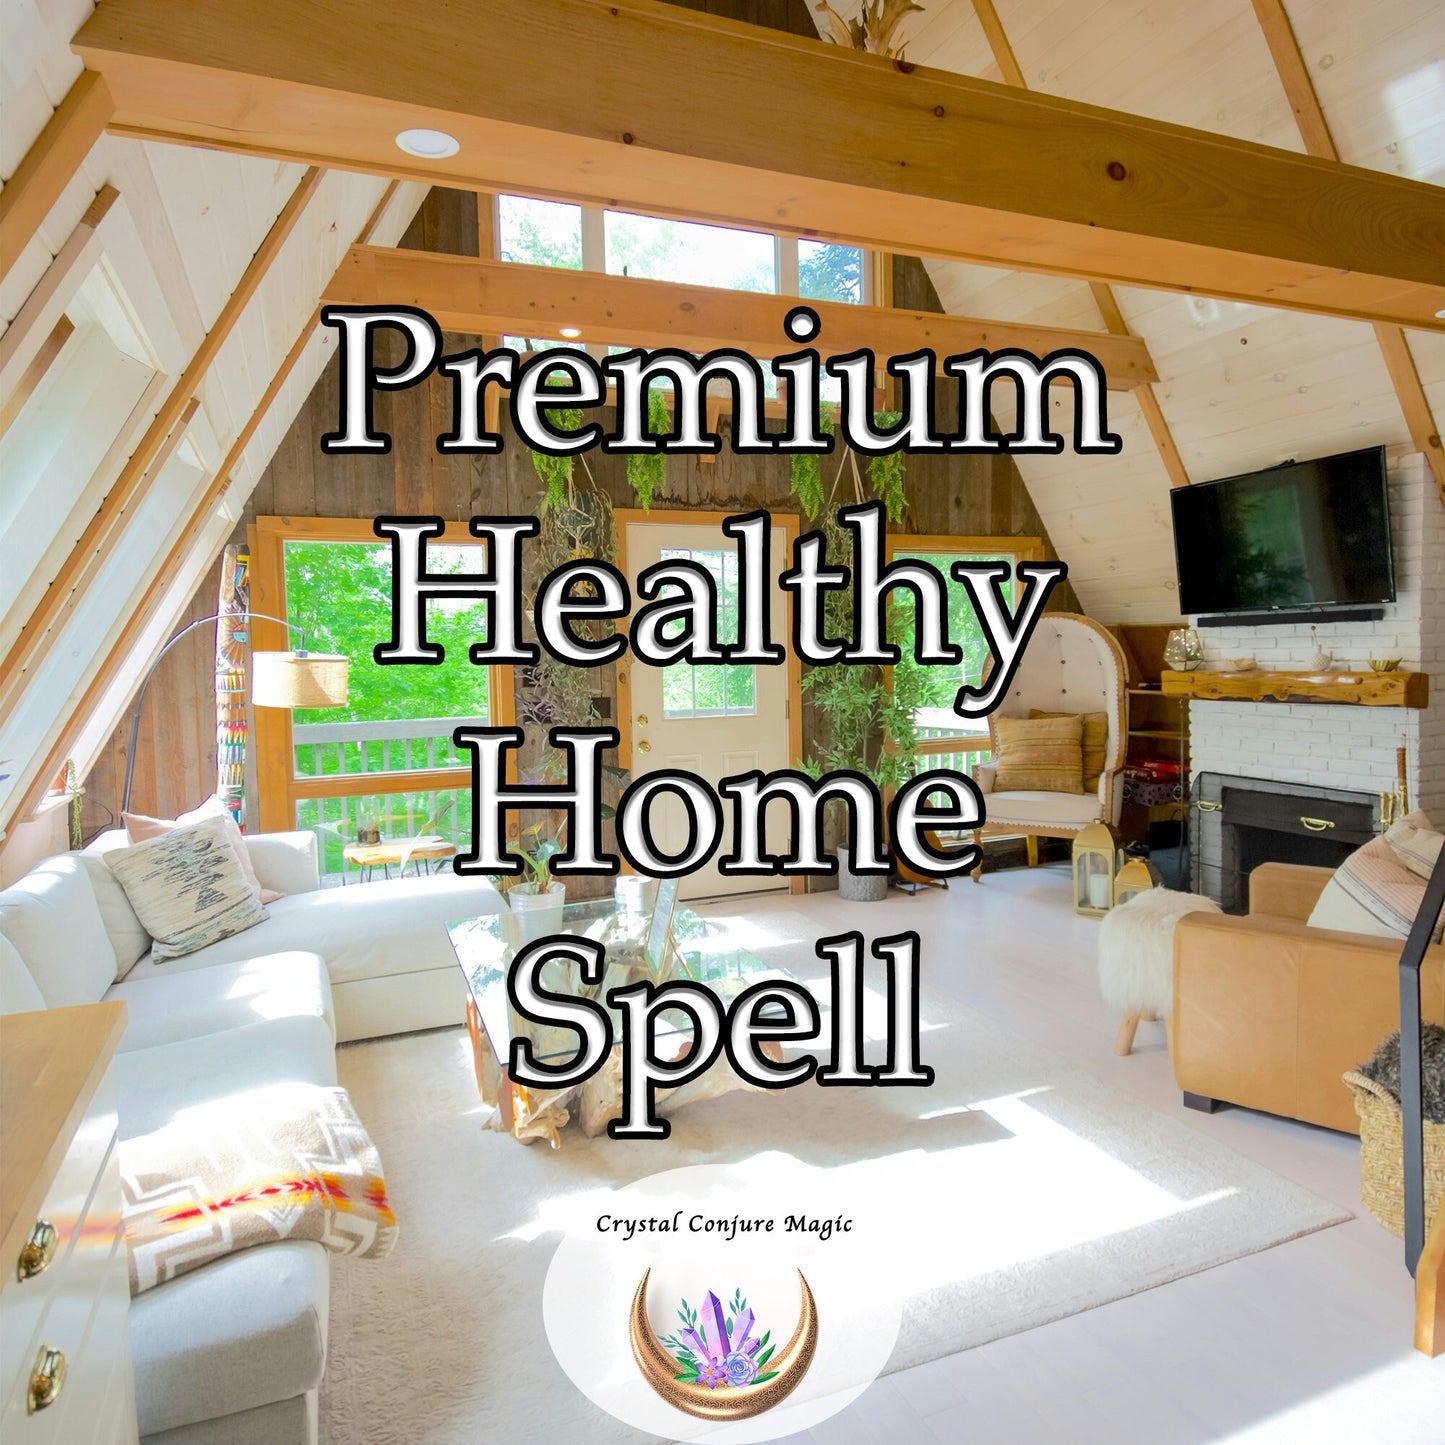 Premium Healthy Home Spell -  equips you with an array of capabilities for maintaining a harmonious, and invigorating living space.